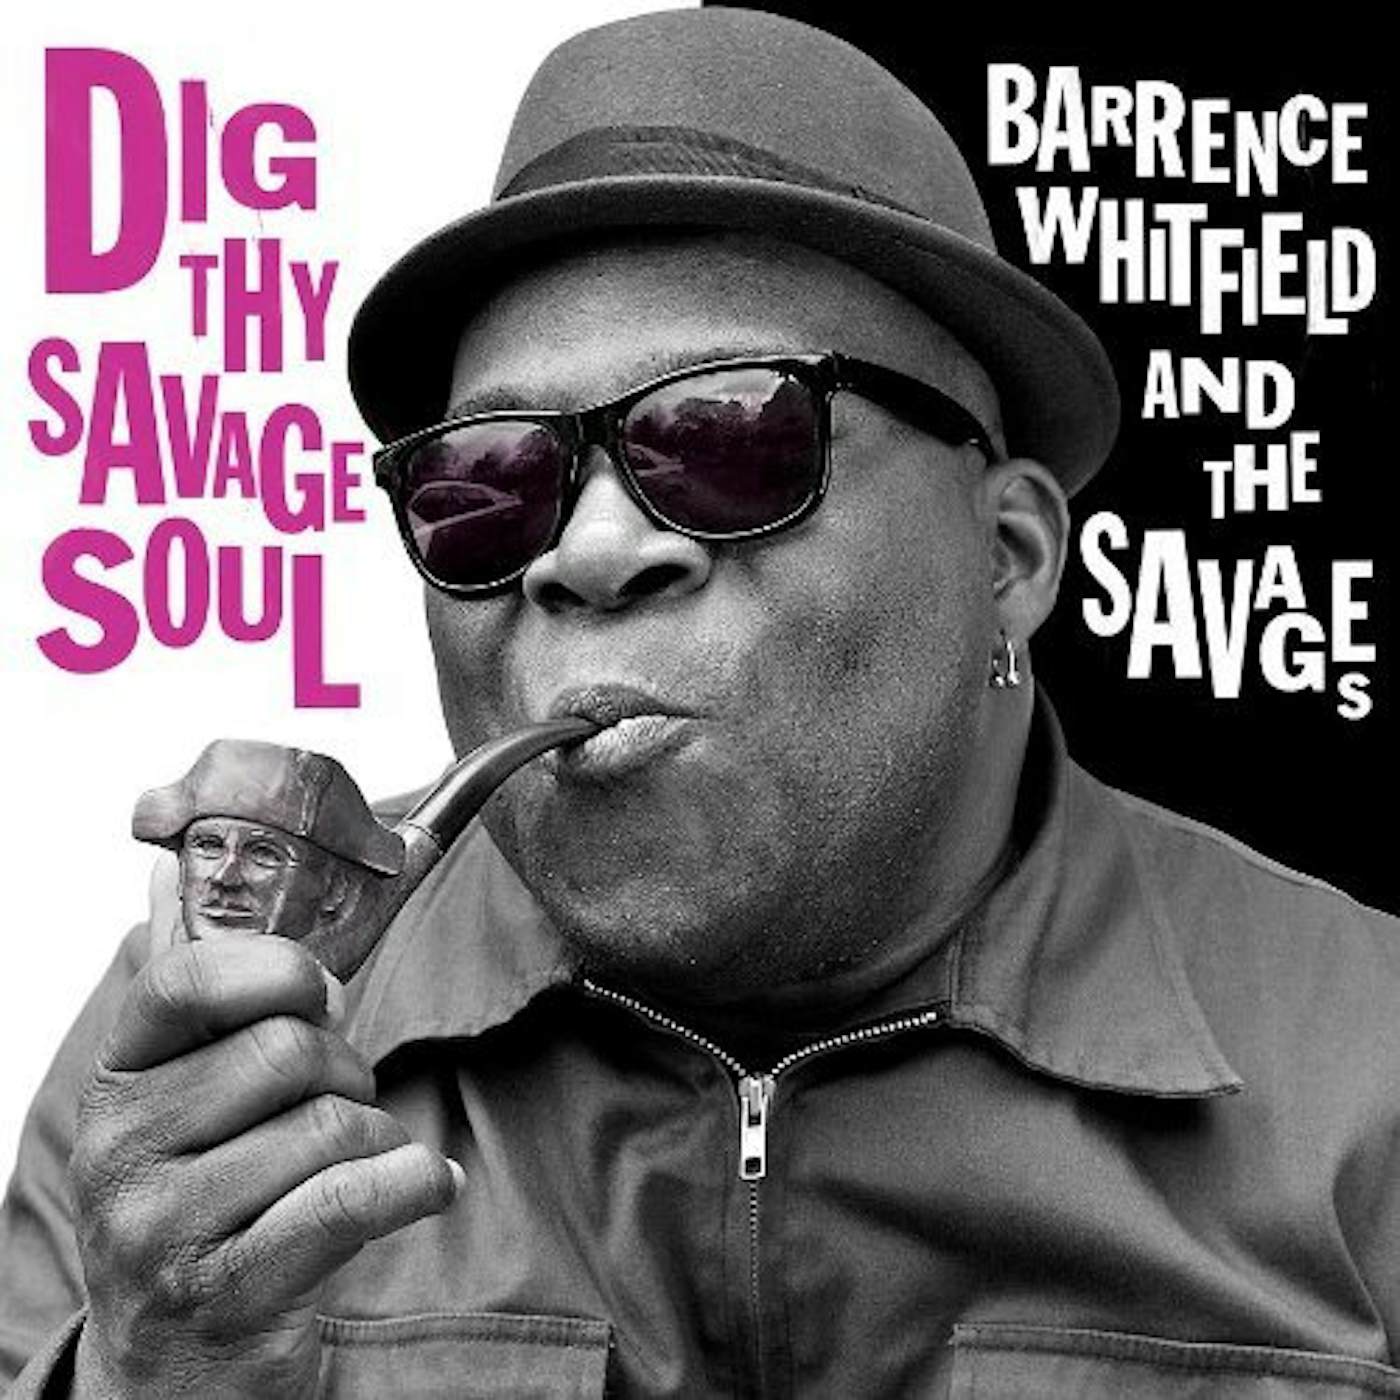 Barrence Whitfield & The Savages Dig Thy Savage Soul Vinyl Record